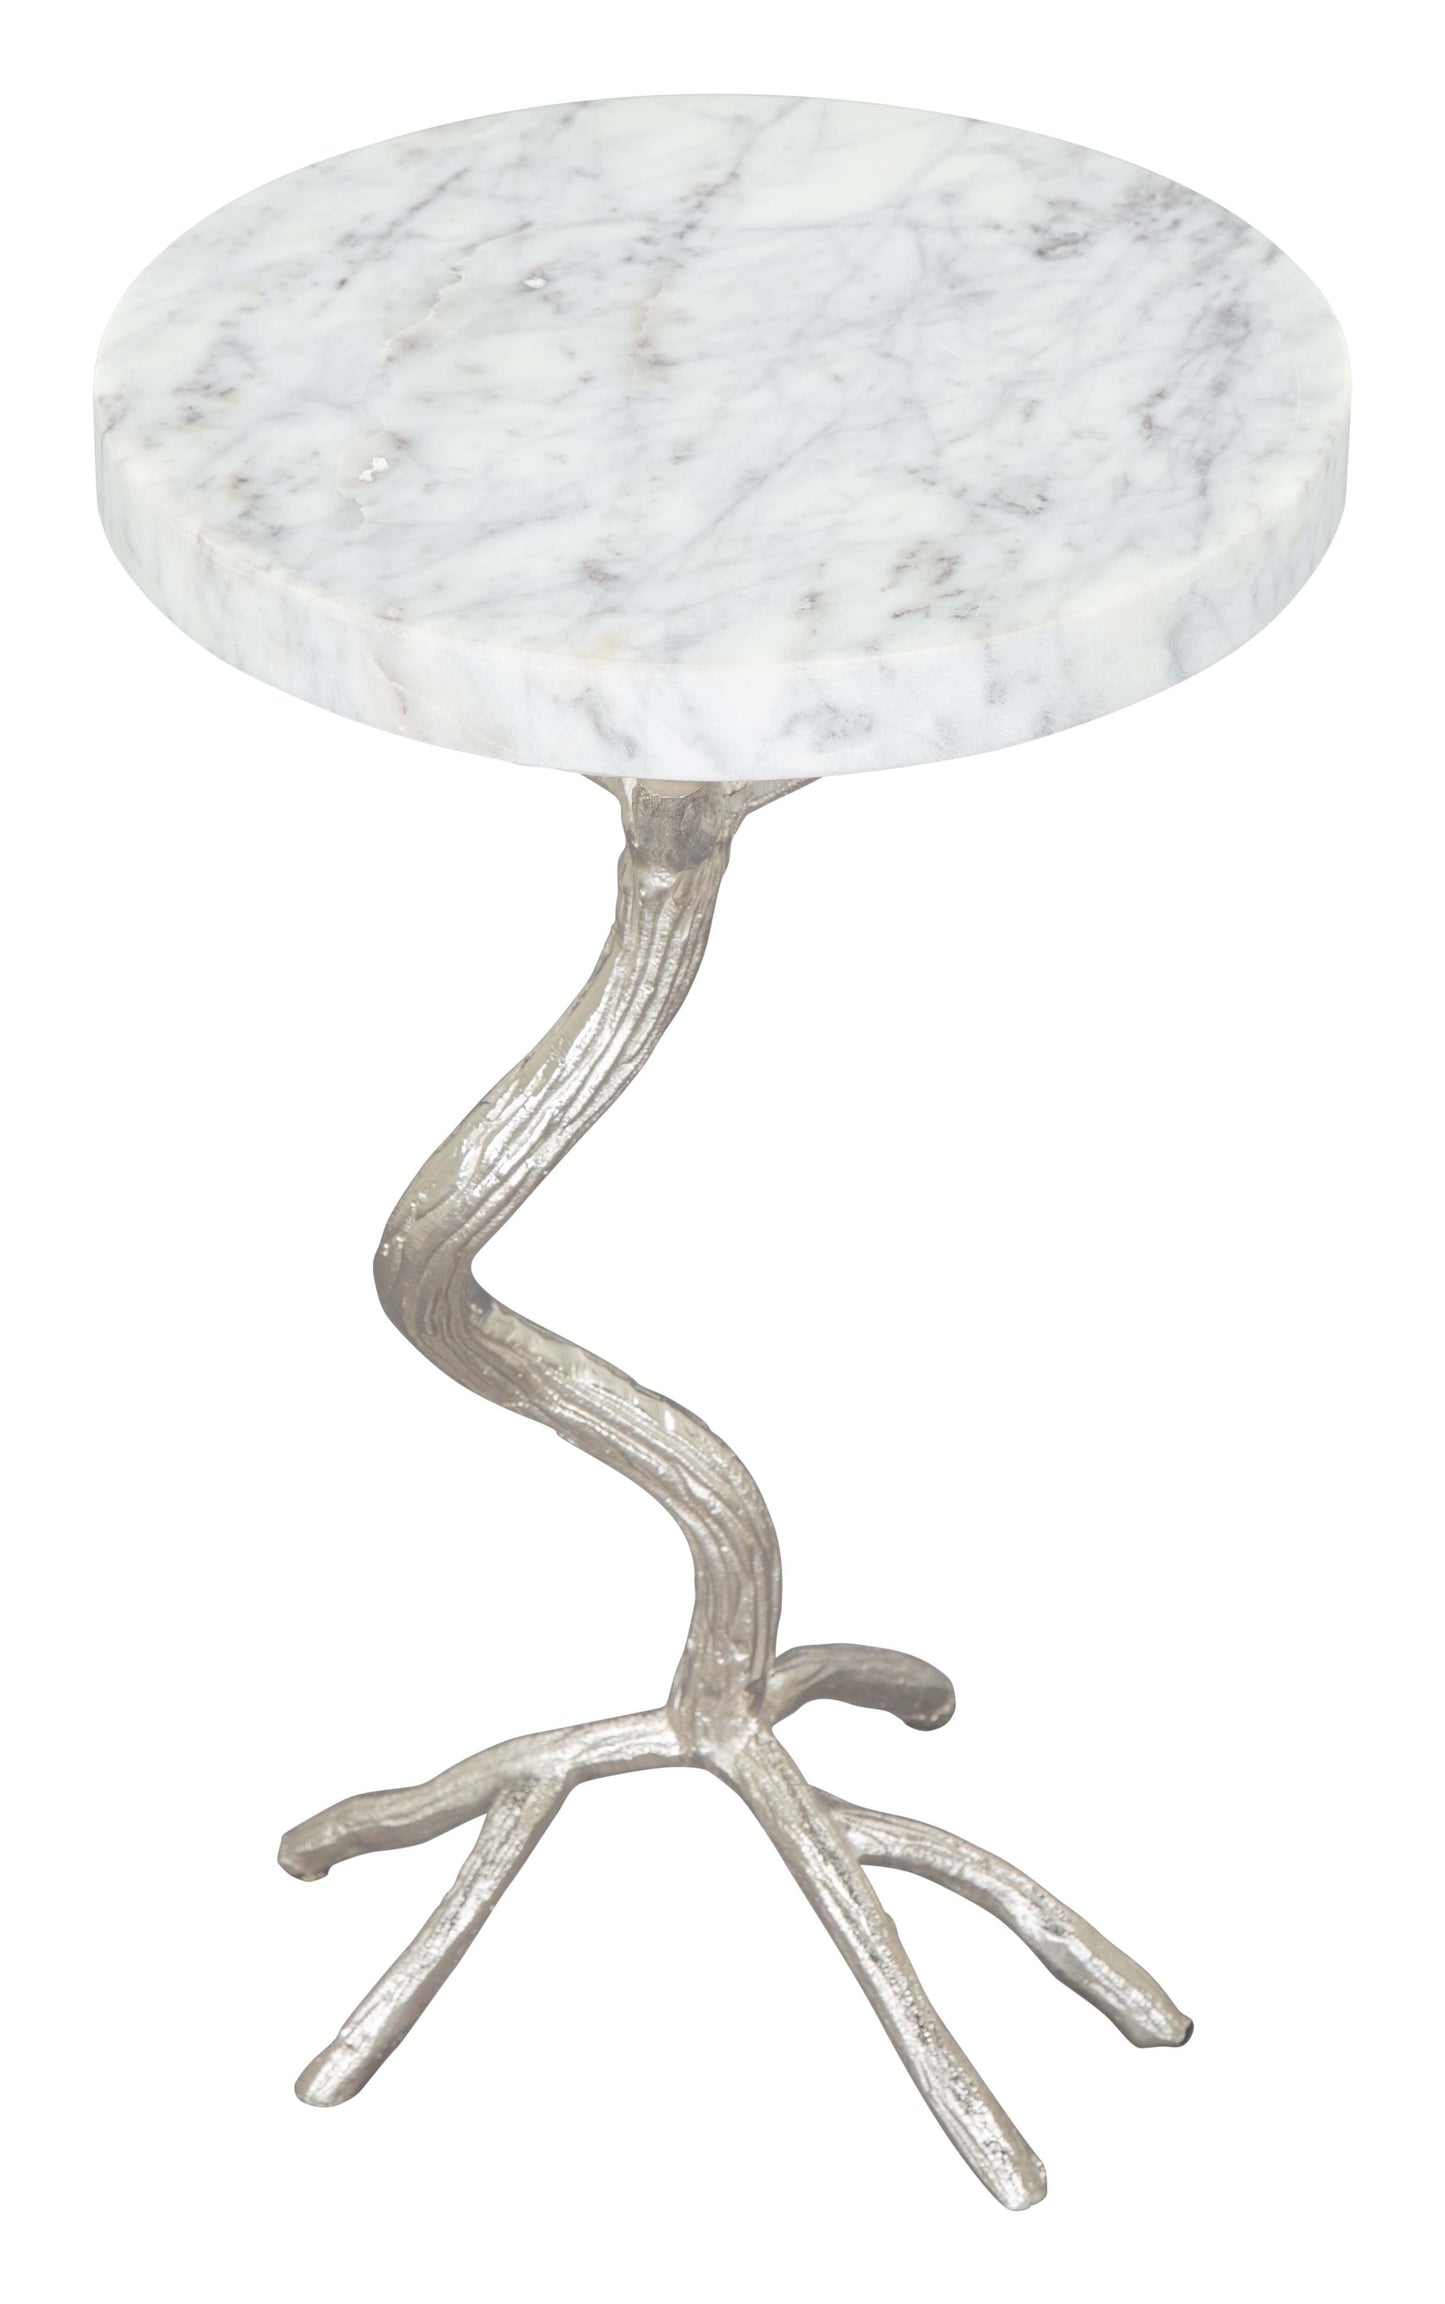 Small marble top, perfect for a drink